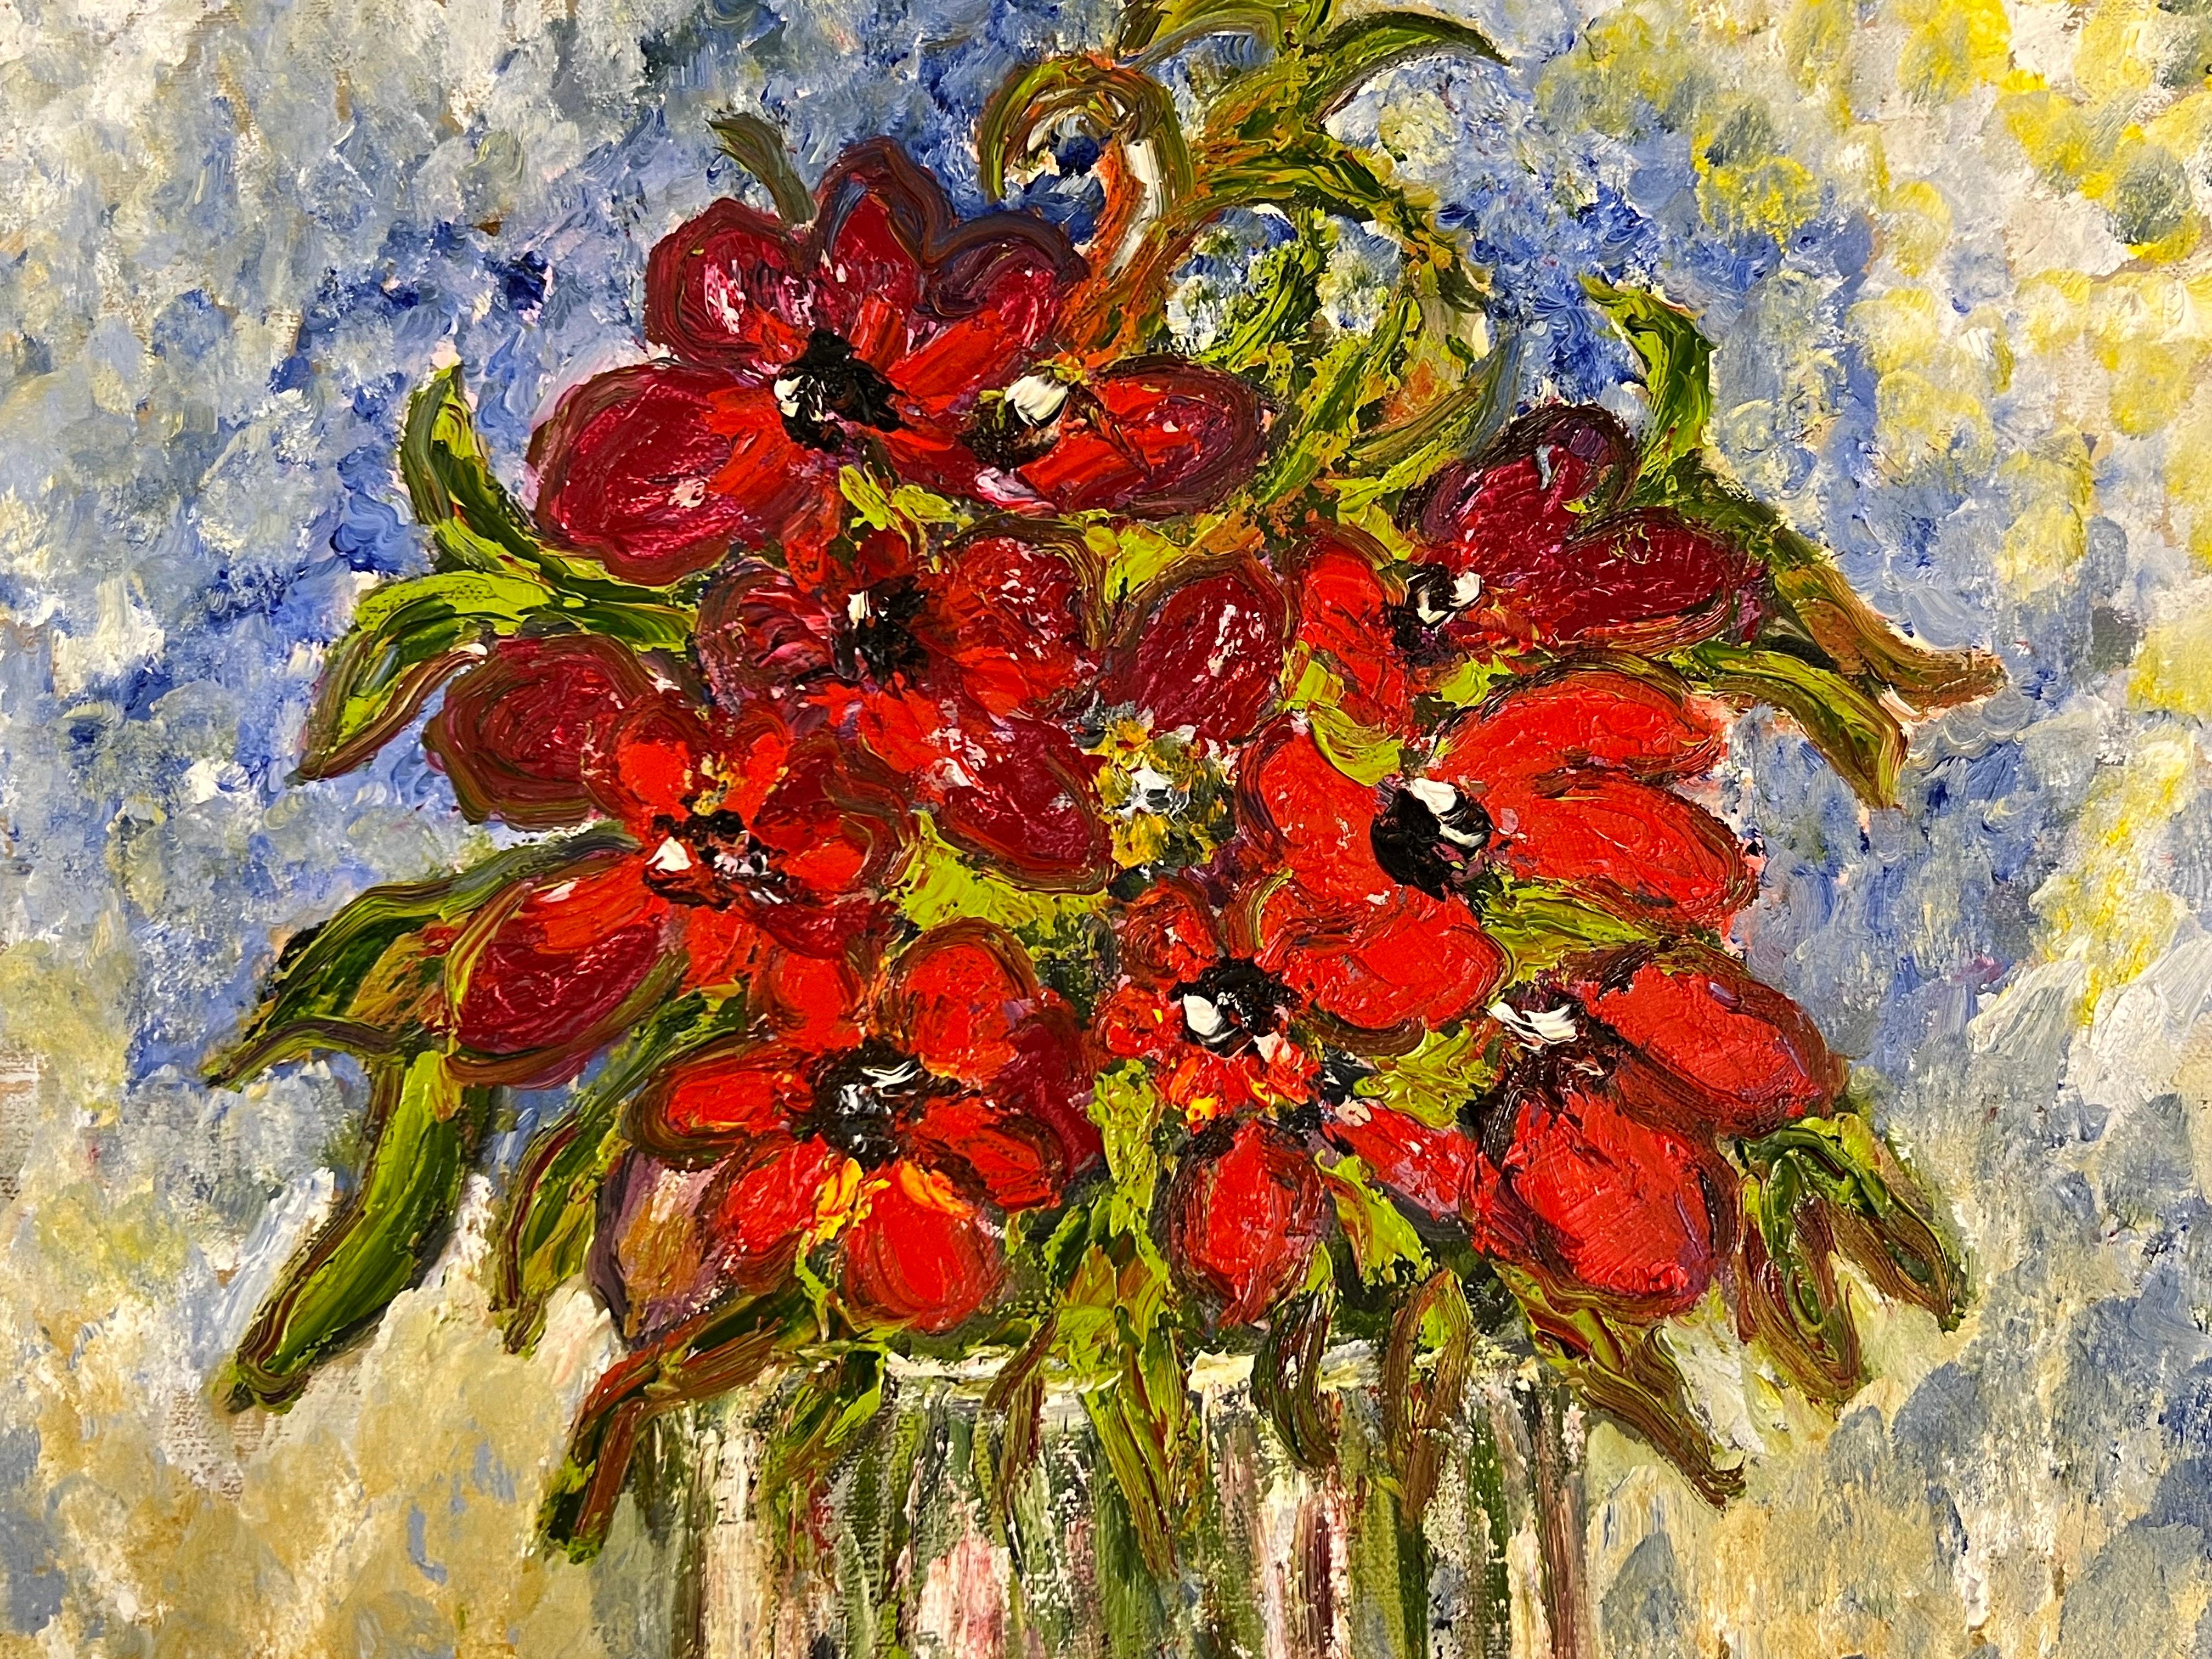 Expressive Still Life Painting Red Rose Flowers 'Red for Love' by British Artist For Sale 8